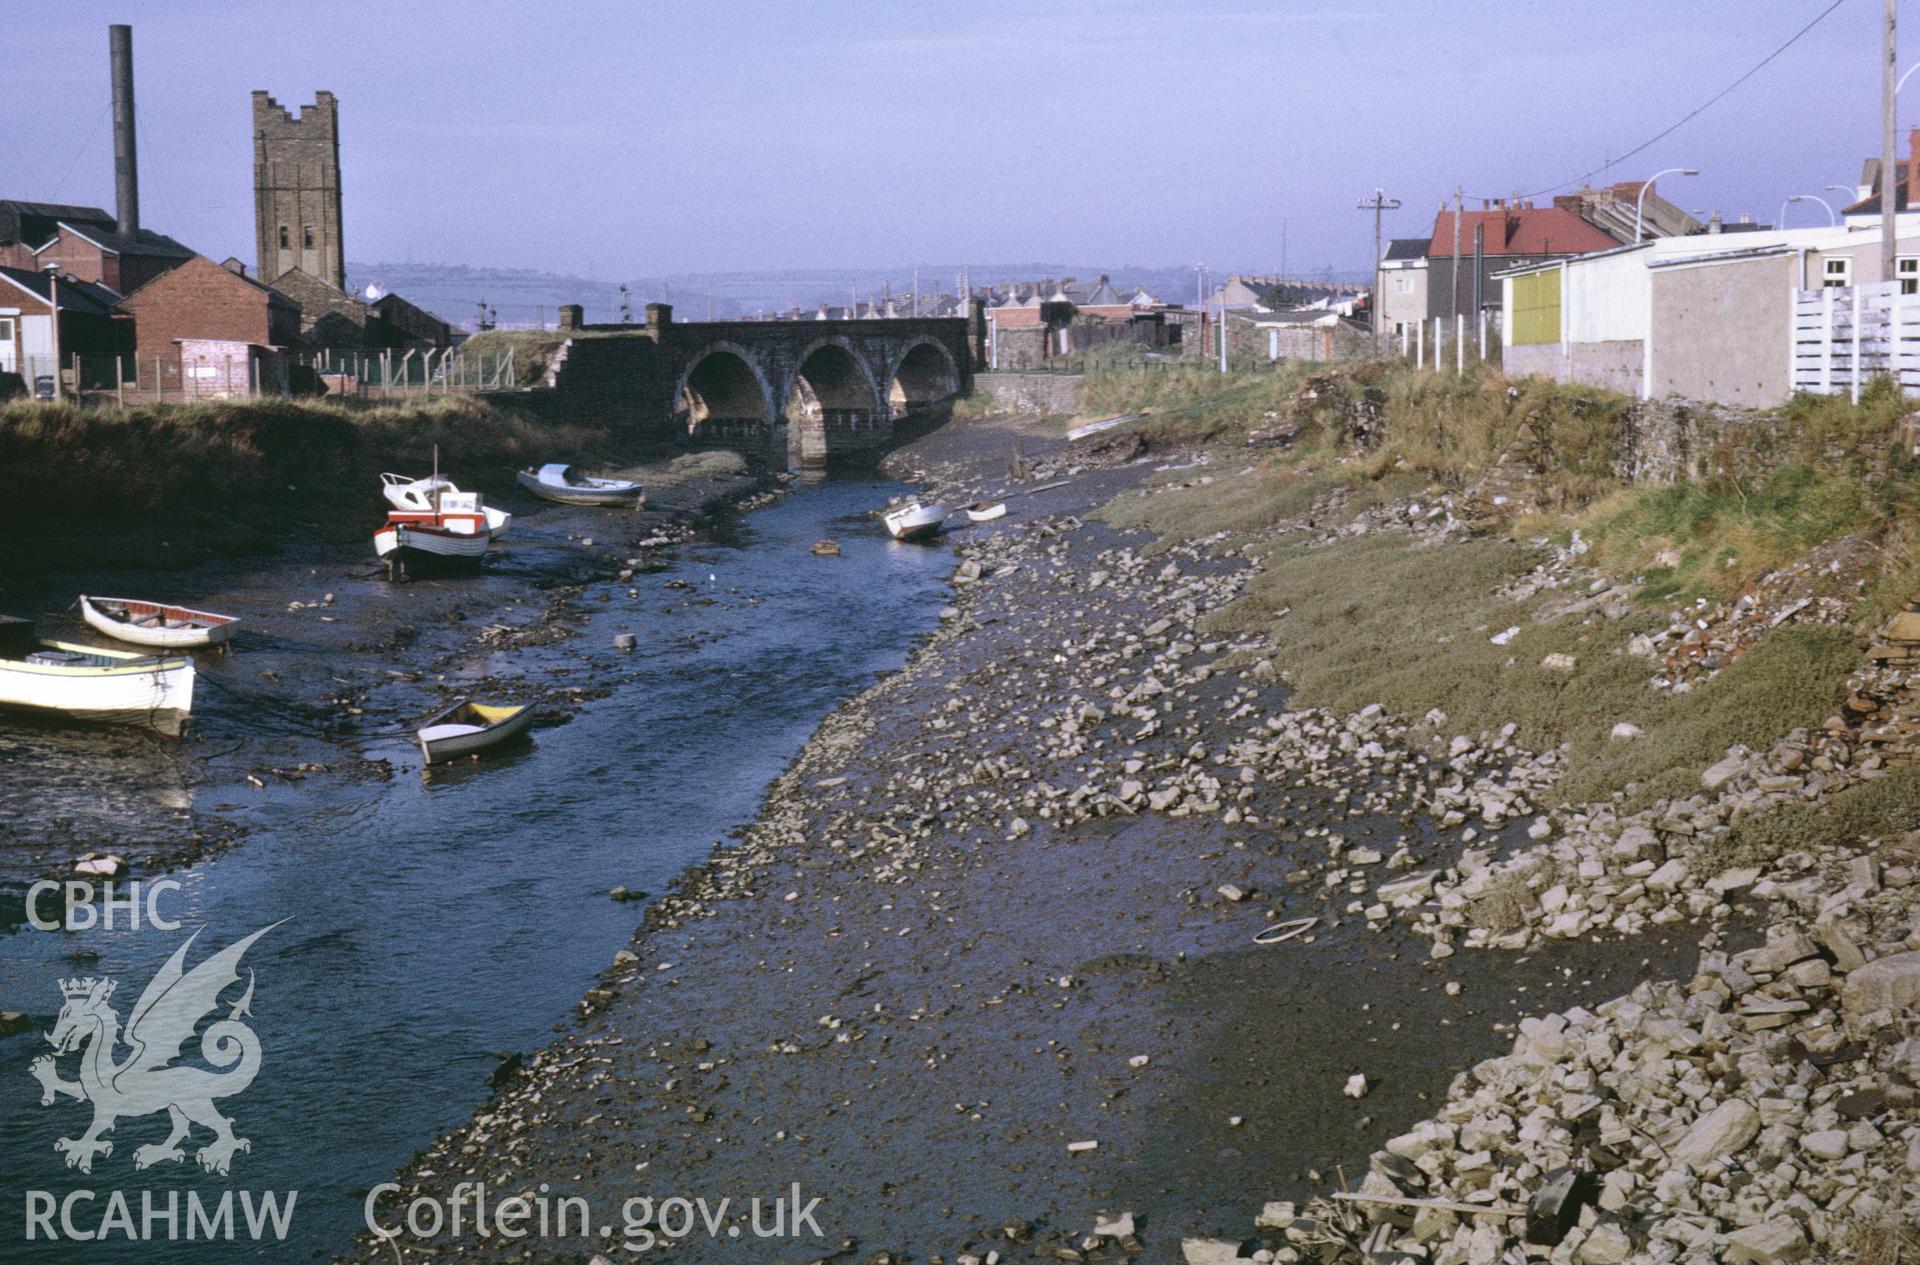 35mm slide showing scouring dock at Llanelli Harbour, Carmarthenshire, by Dylan Roberts.